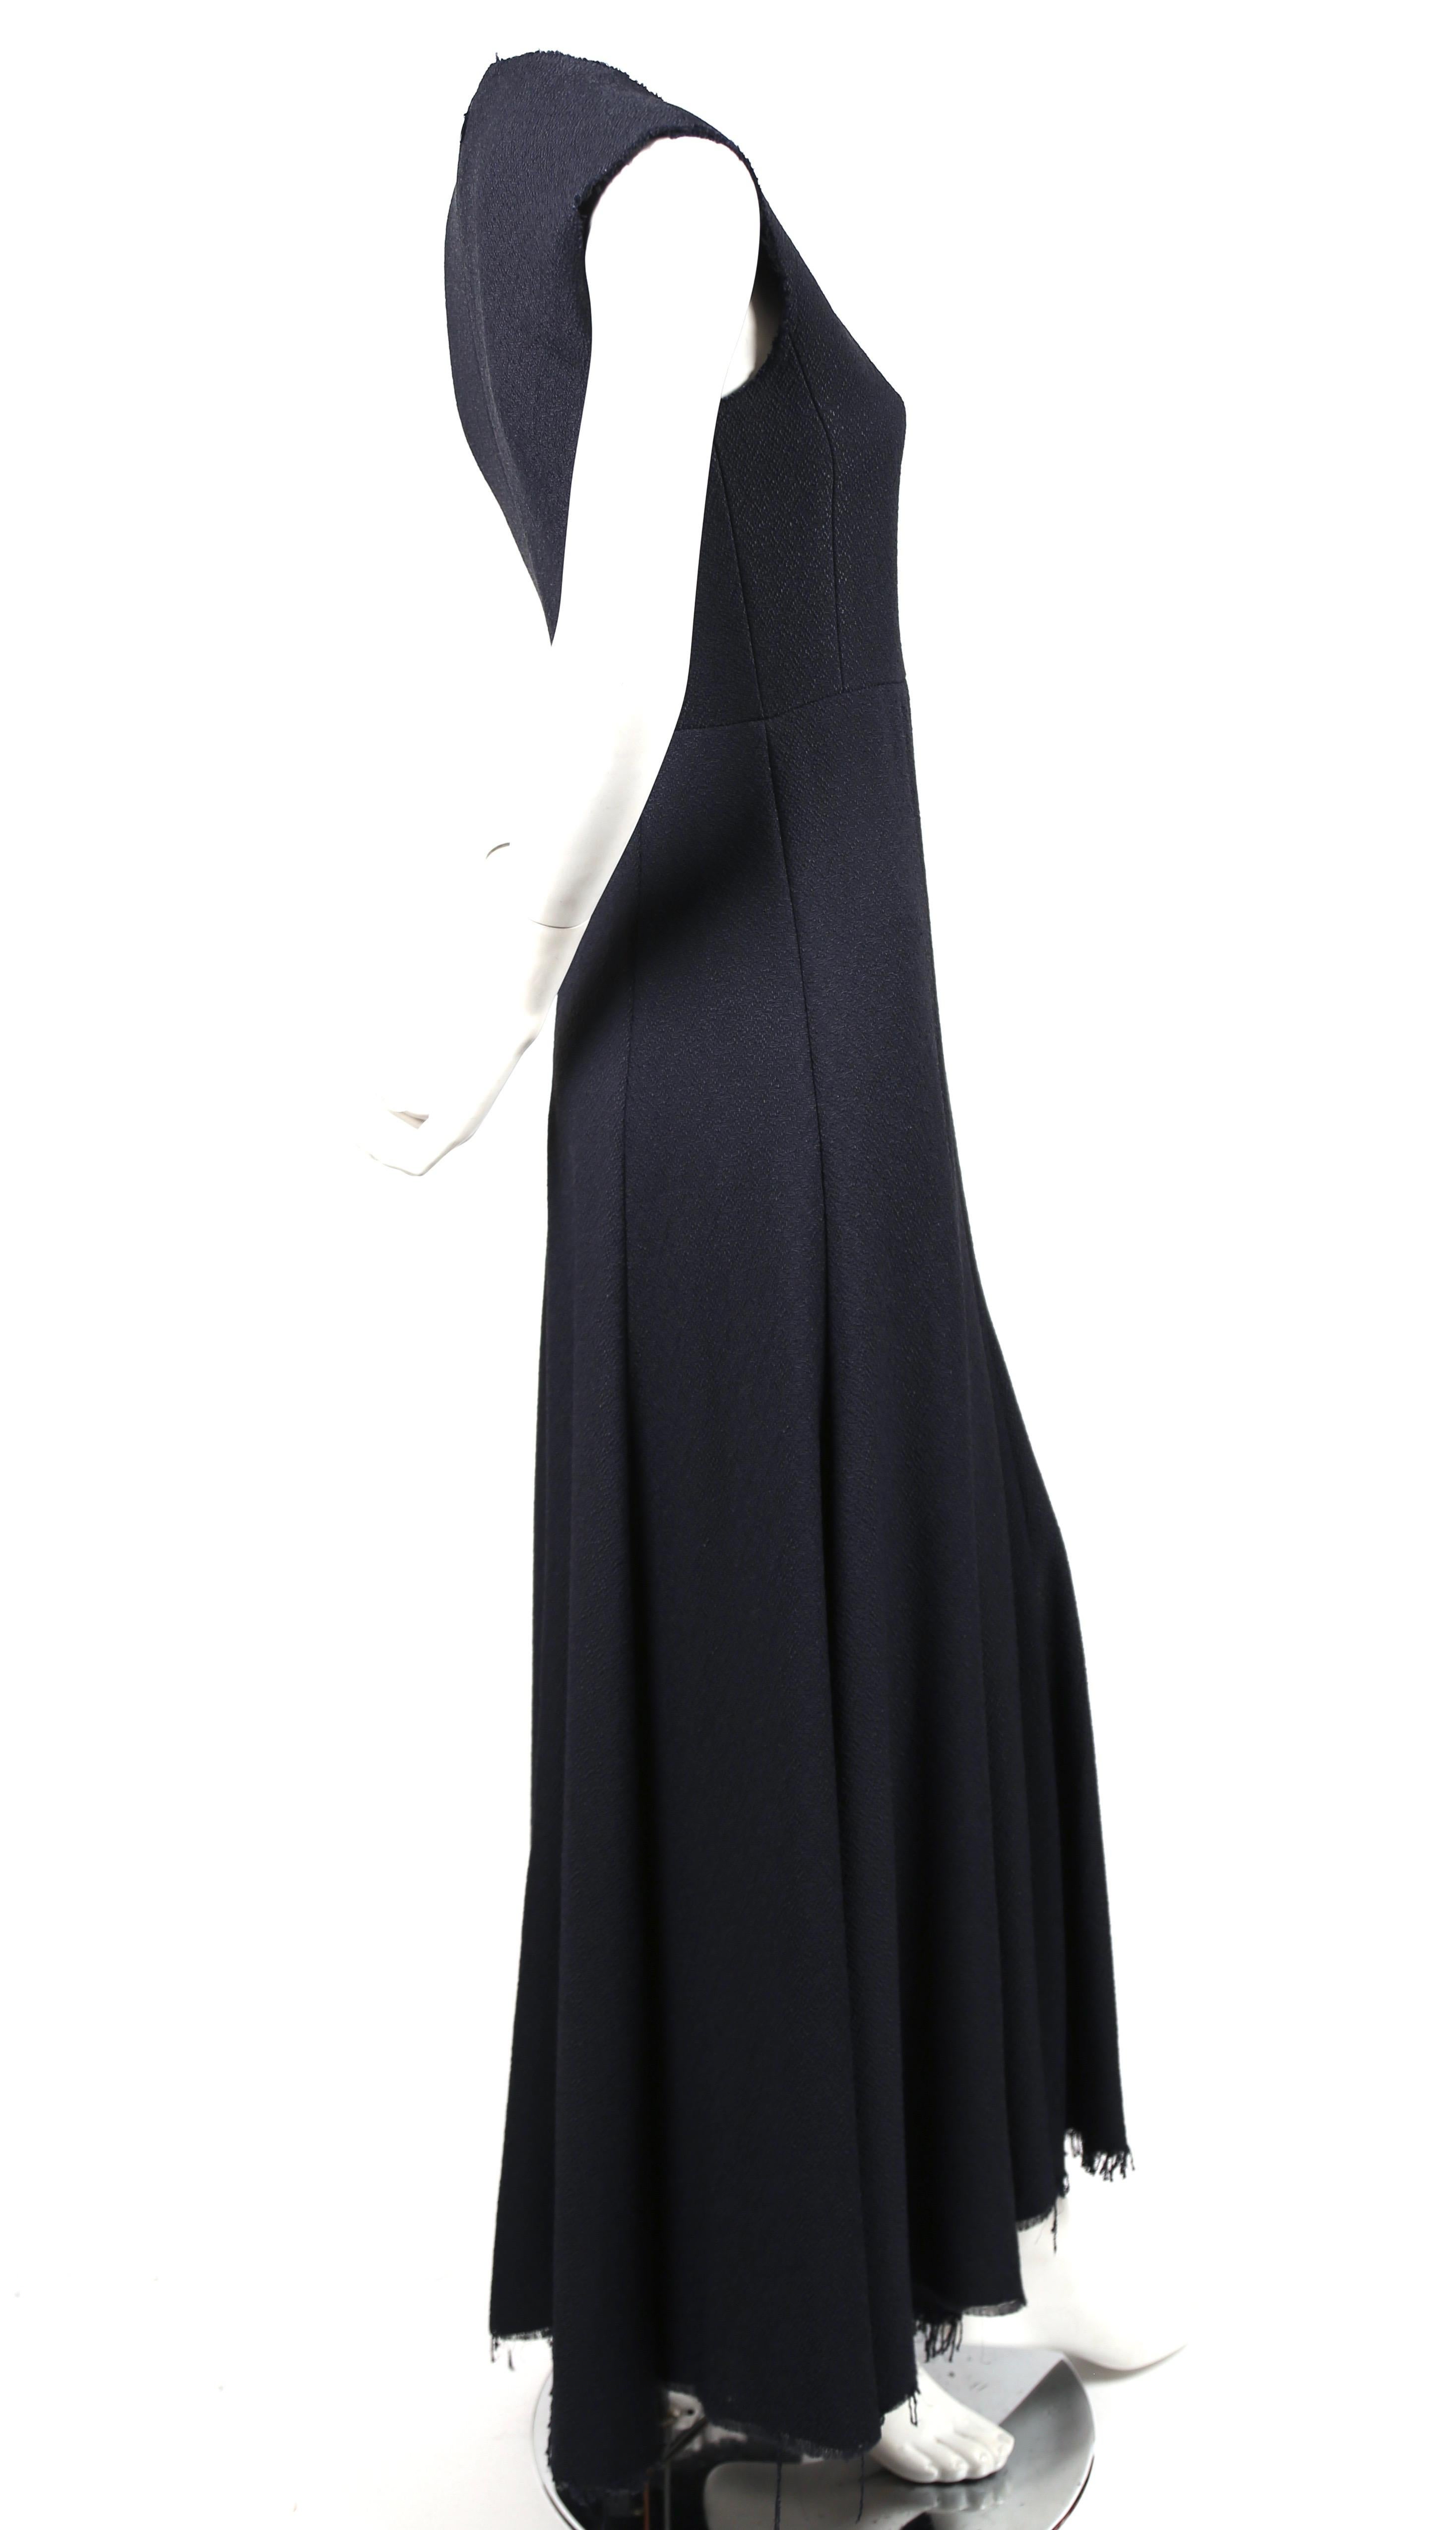 Very rare, navy blue seamed maxi dress with raw edges and fringed hemline designed by Phoebe Philo for Celine exactly as seen on the 2013 spring runway and featured in the spring 2013 Celine ad campaign. This is a very difficult to find dress.